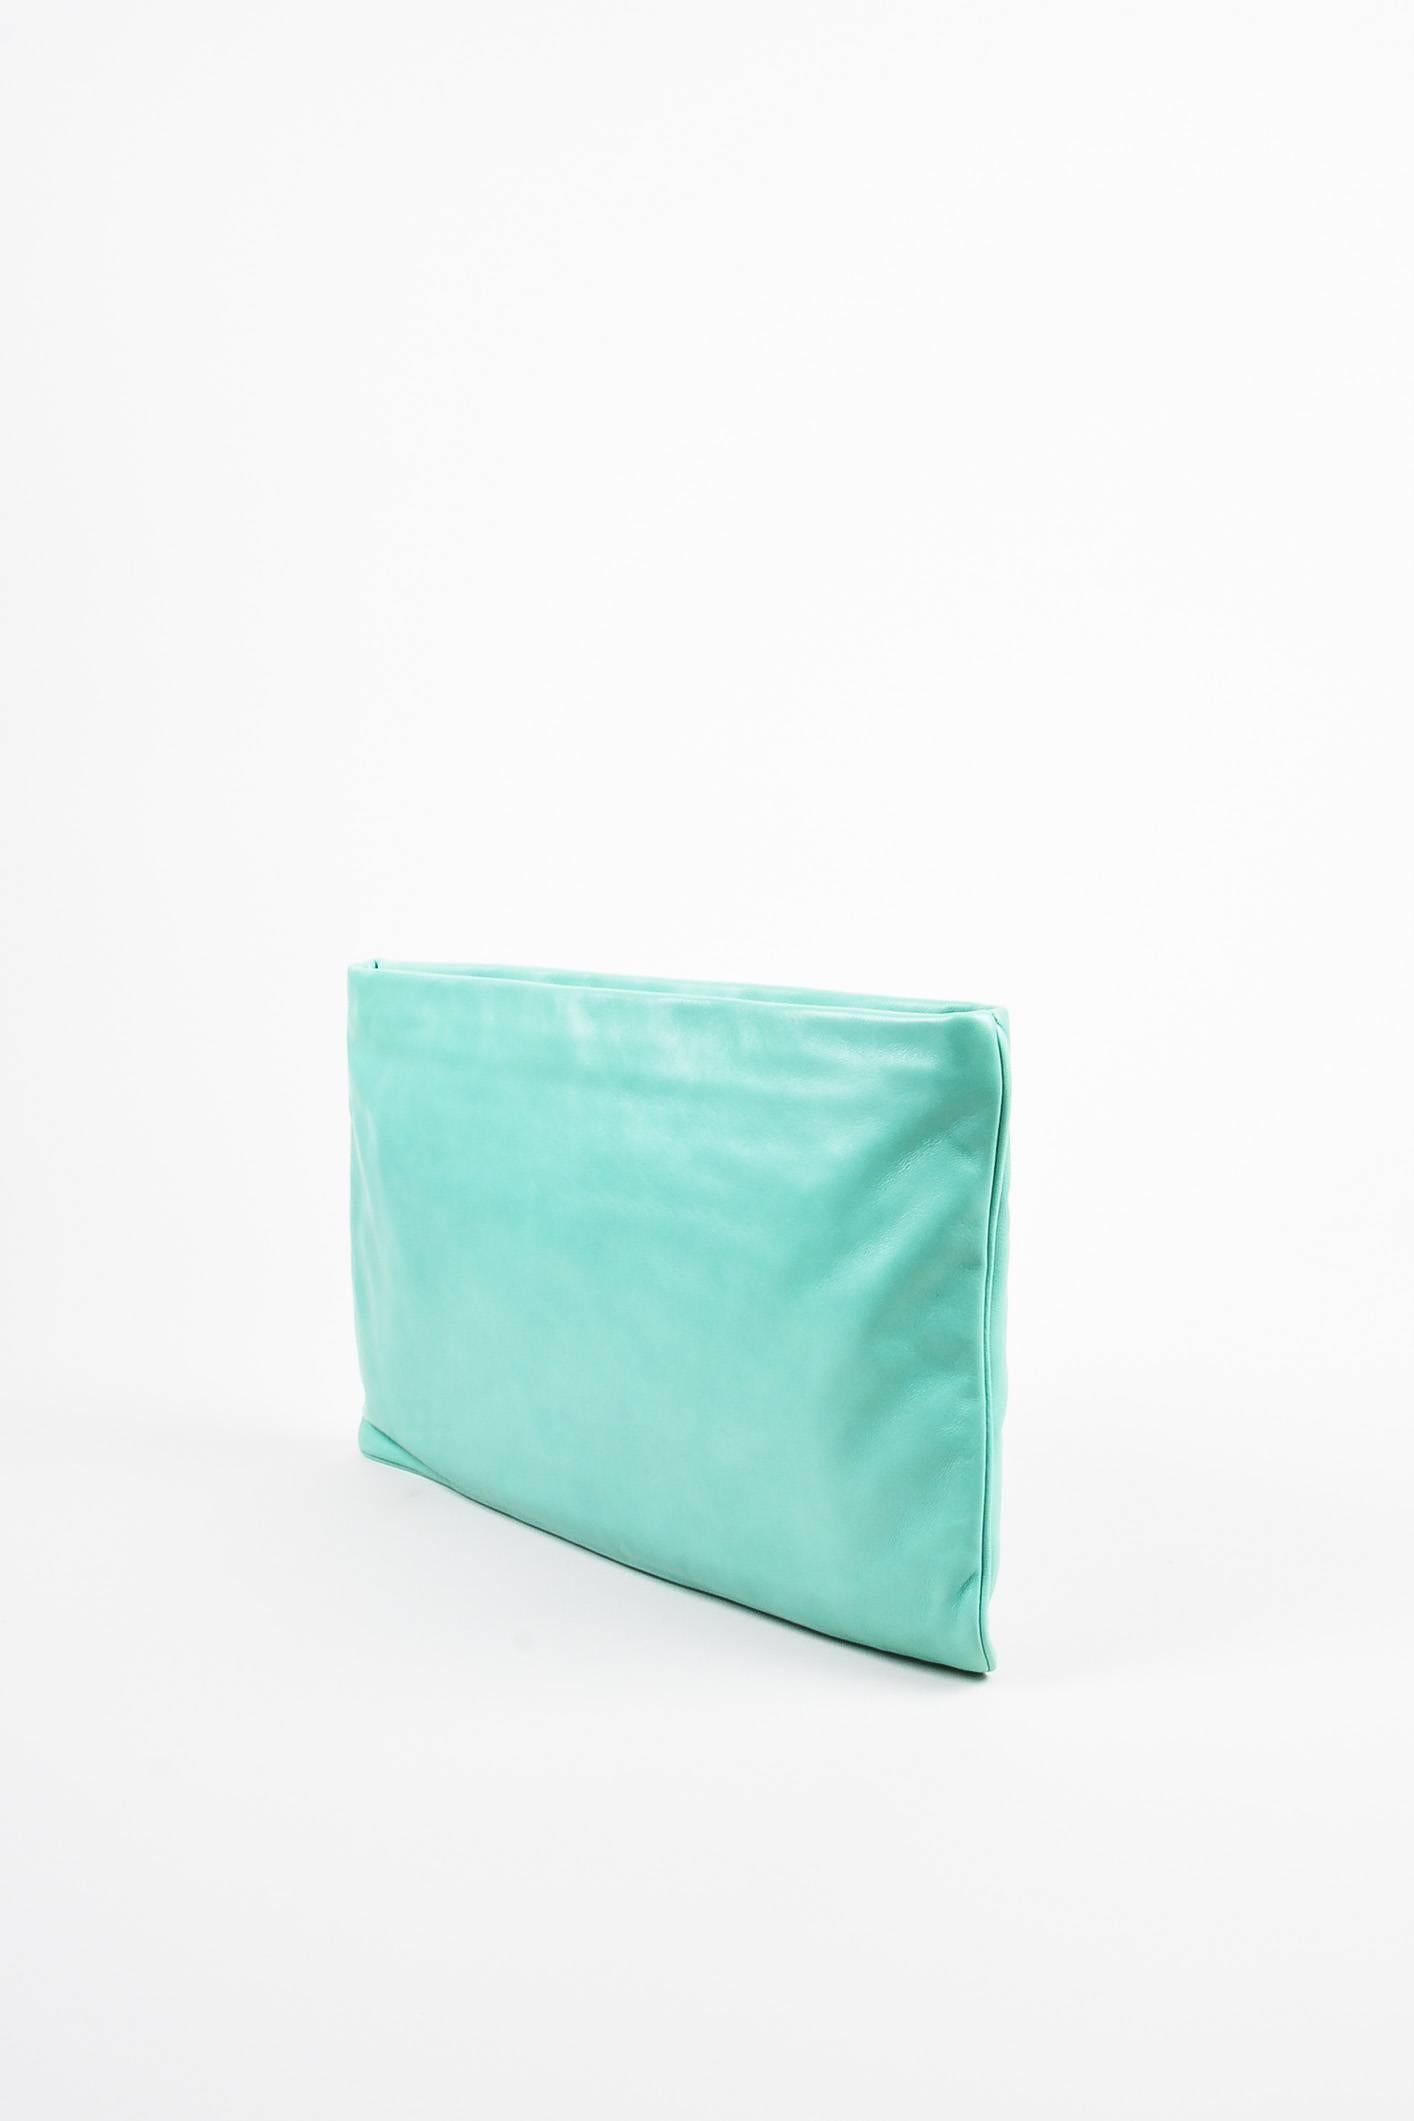 Turquoise leather clutch bag by Prada featuring red and white dice at front corner, trimmed in black patent leather . Designed with a gold-tone metal zip closure. 